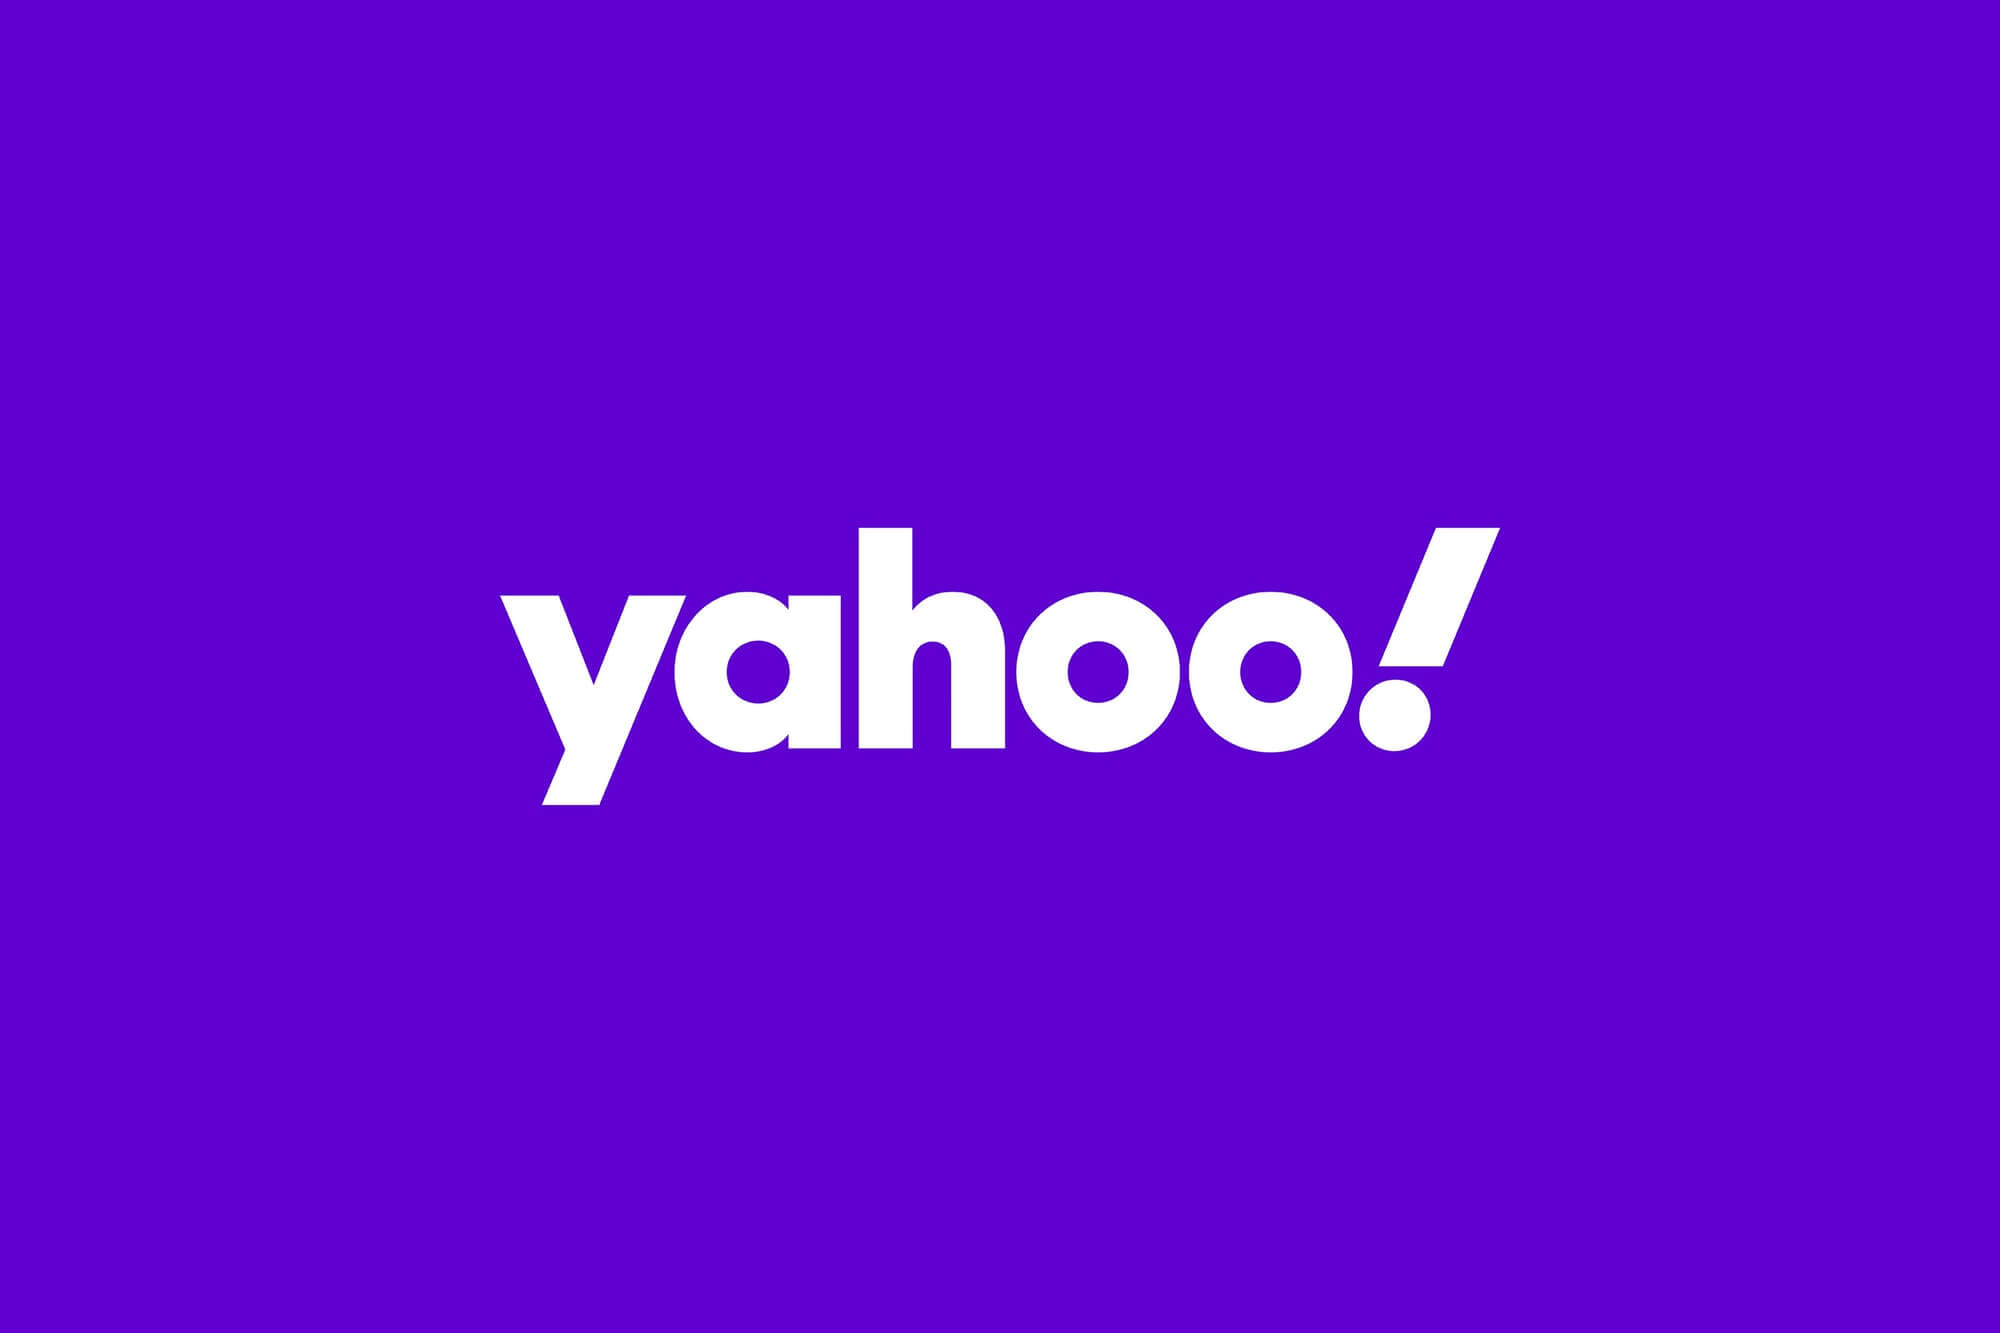 Yahoo updates logo for the second time in 25 years